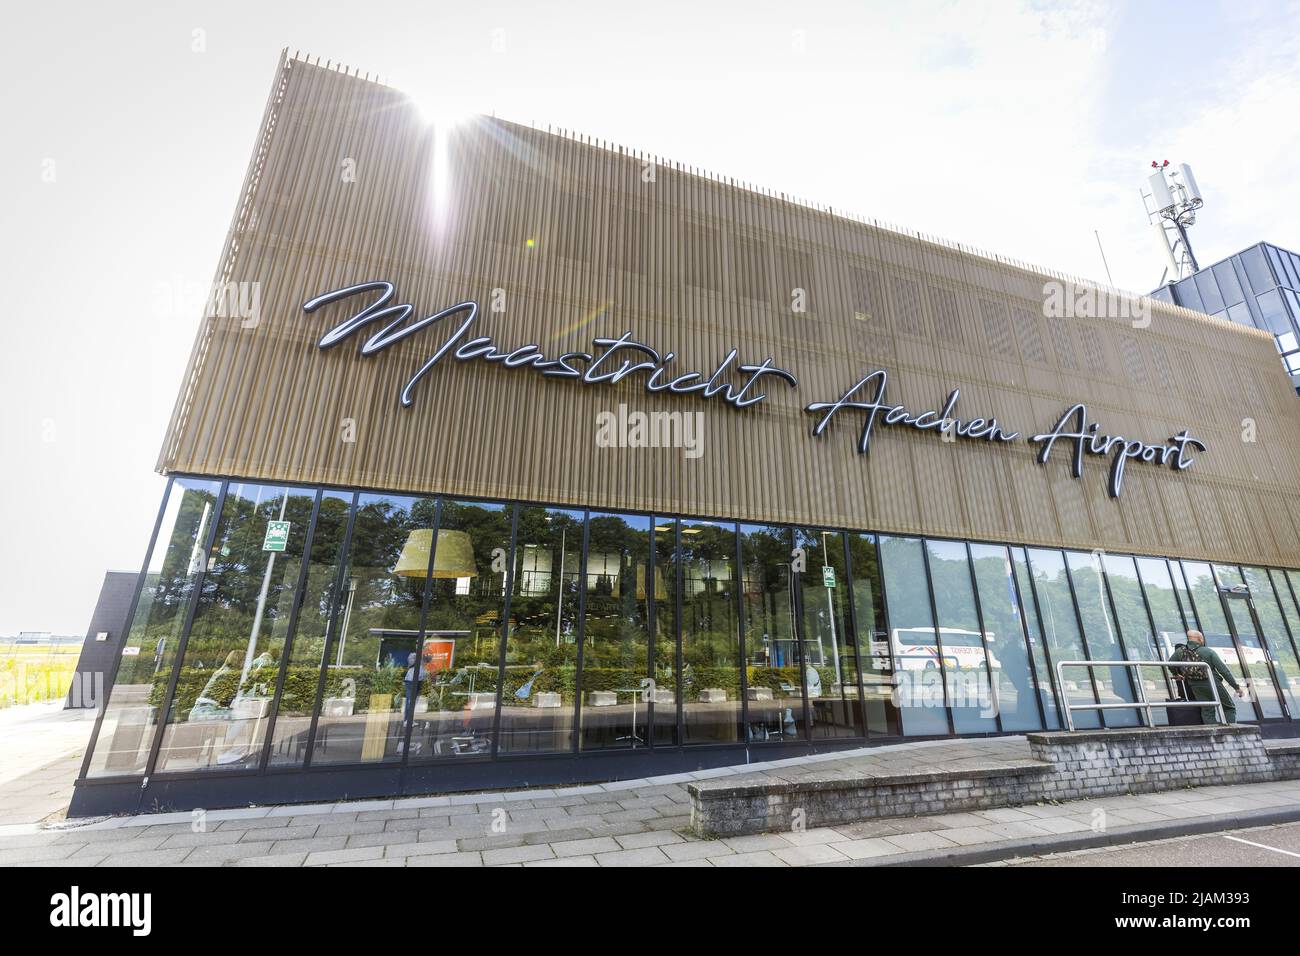 2022-05-31 10:50:39 MAASTRICHT - Exterior of Maastricht Aachen Airport. The provincial government of Limburg leaves the decision about the future of Maastricht Aachen Airport entirely to the Provincial Council. ANP MARCEL VAN HOORN netherlands out - belgium out Stock Photo